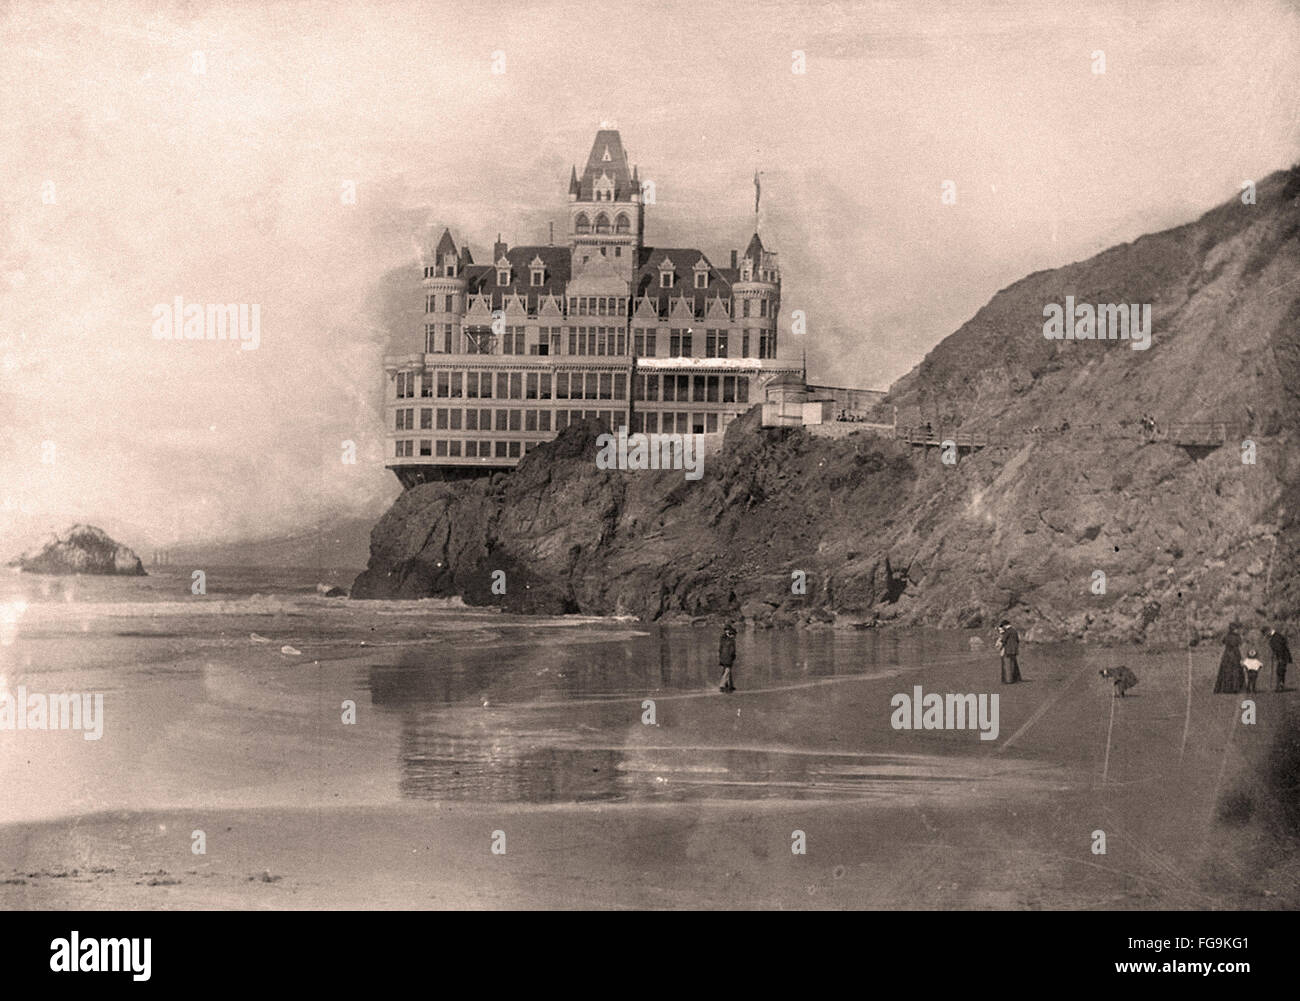 The Cliff House in San Francisco - 1896 Stock Photo